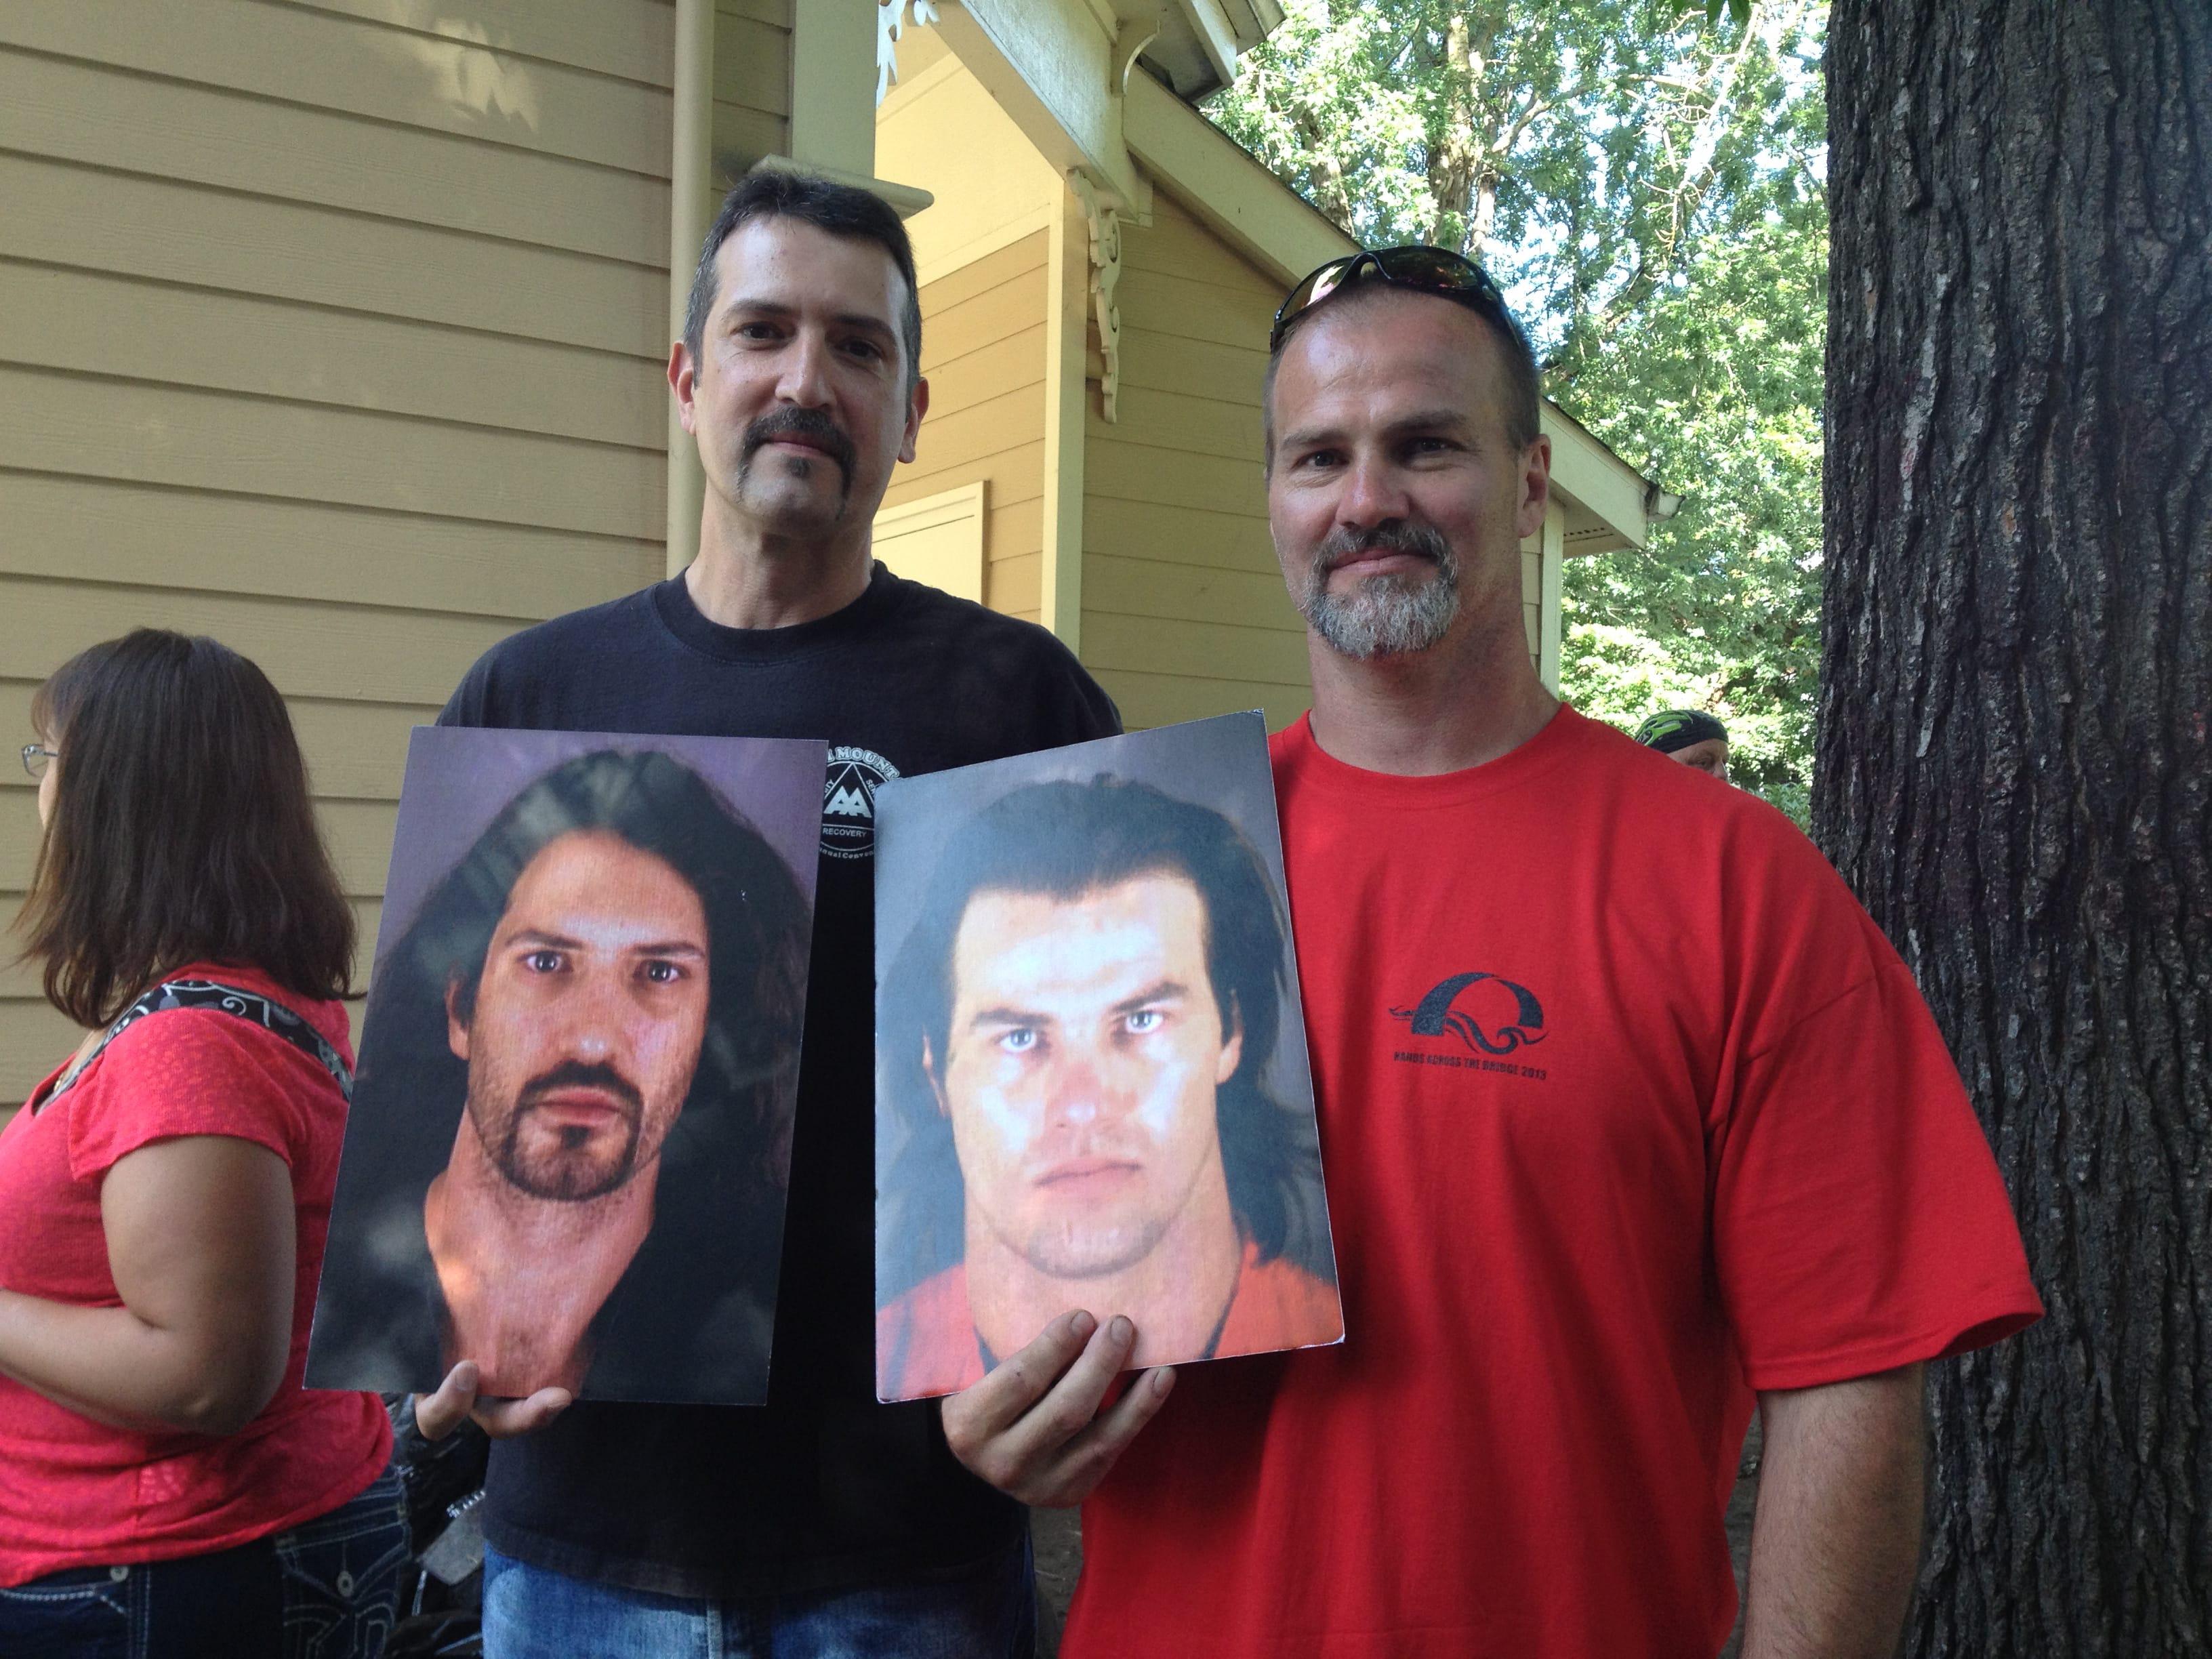 EMILY GILLESPIE/The Columbian 
 Shane Clark, 45, and Ken Jennings, 44, both of Vancouver hold up photos of their mug shots, each taken more than 10 years ago while they were doing methamphetamine. Clark is eight years clean and Jennings celebrated 10 years clean this year.